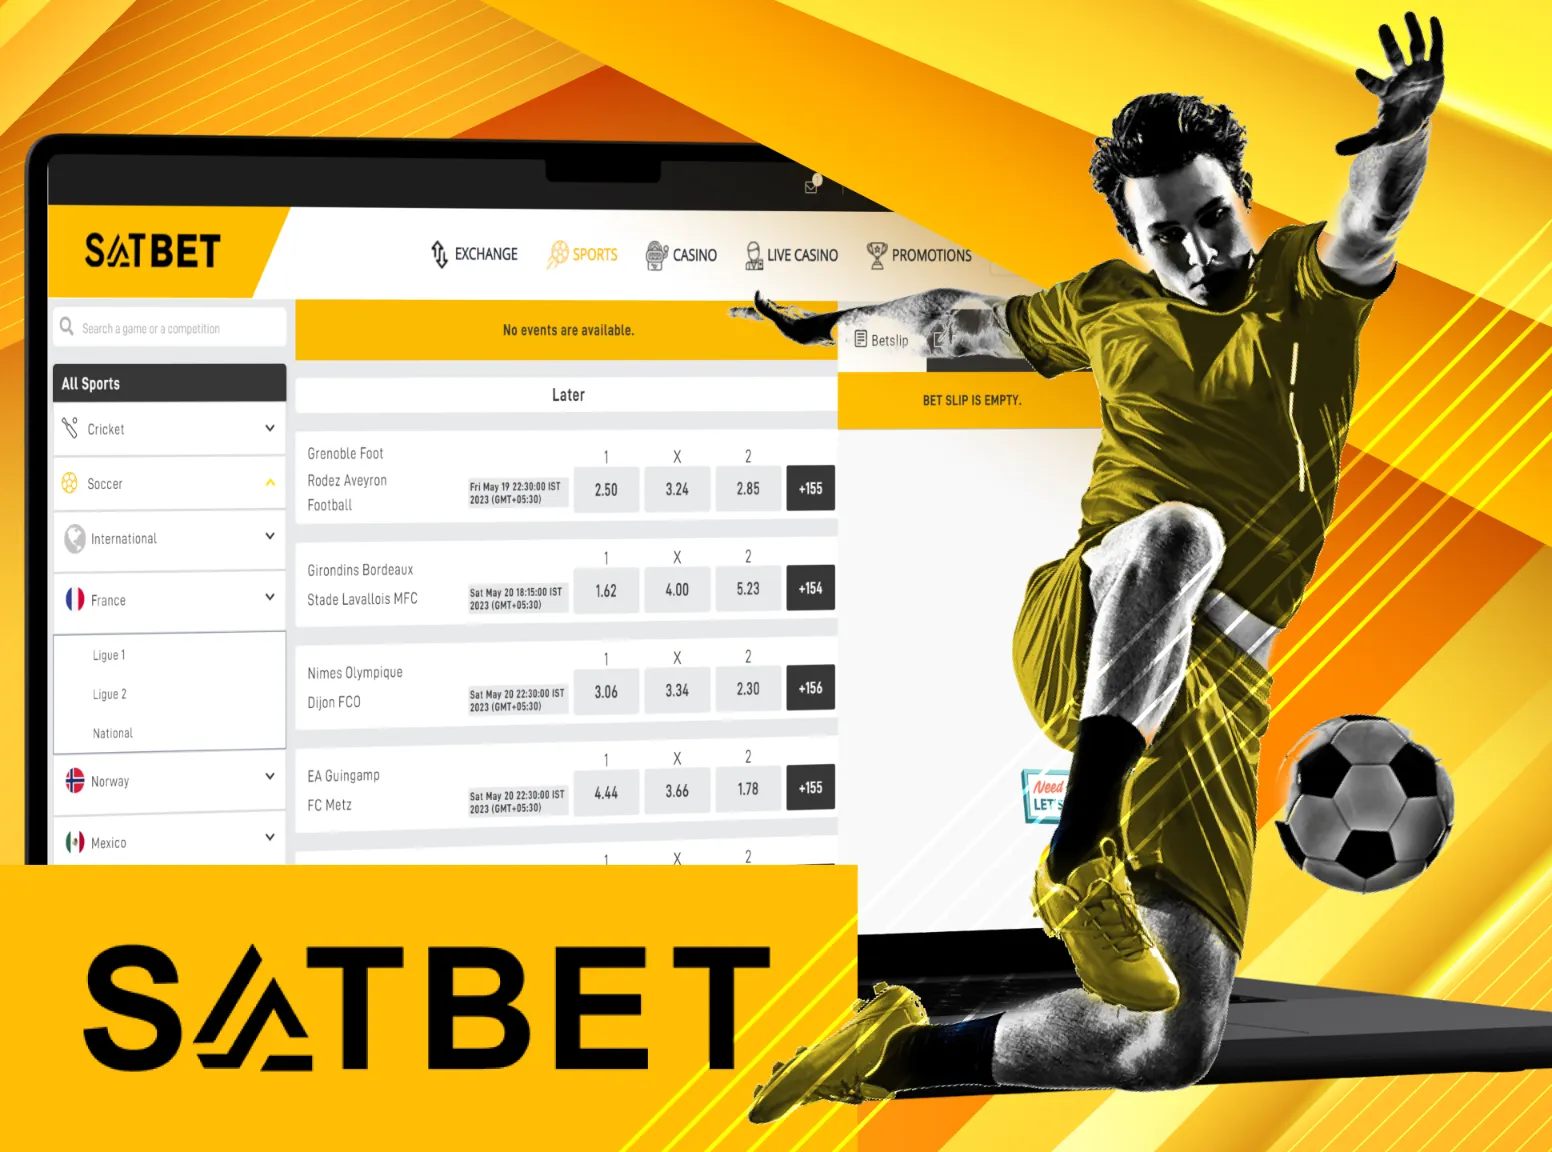 Make bets on football matches at Satbet.